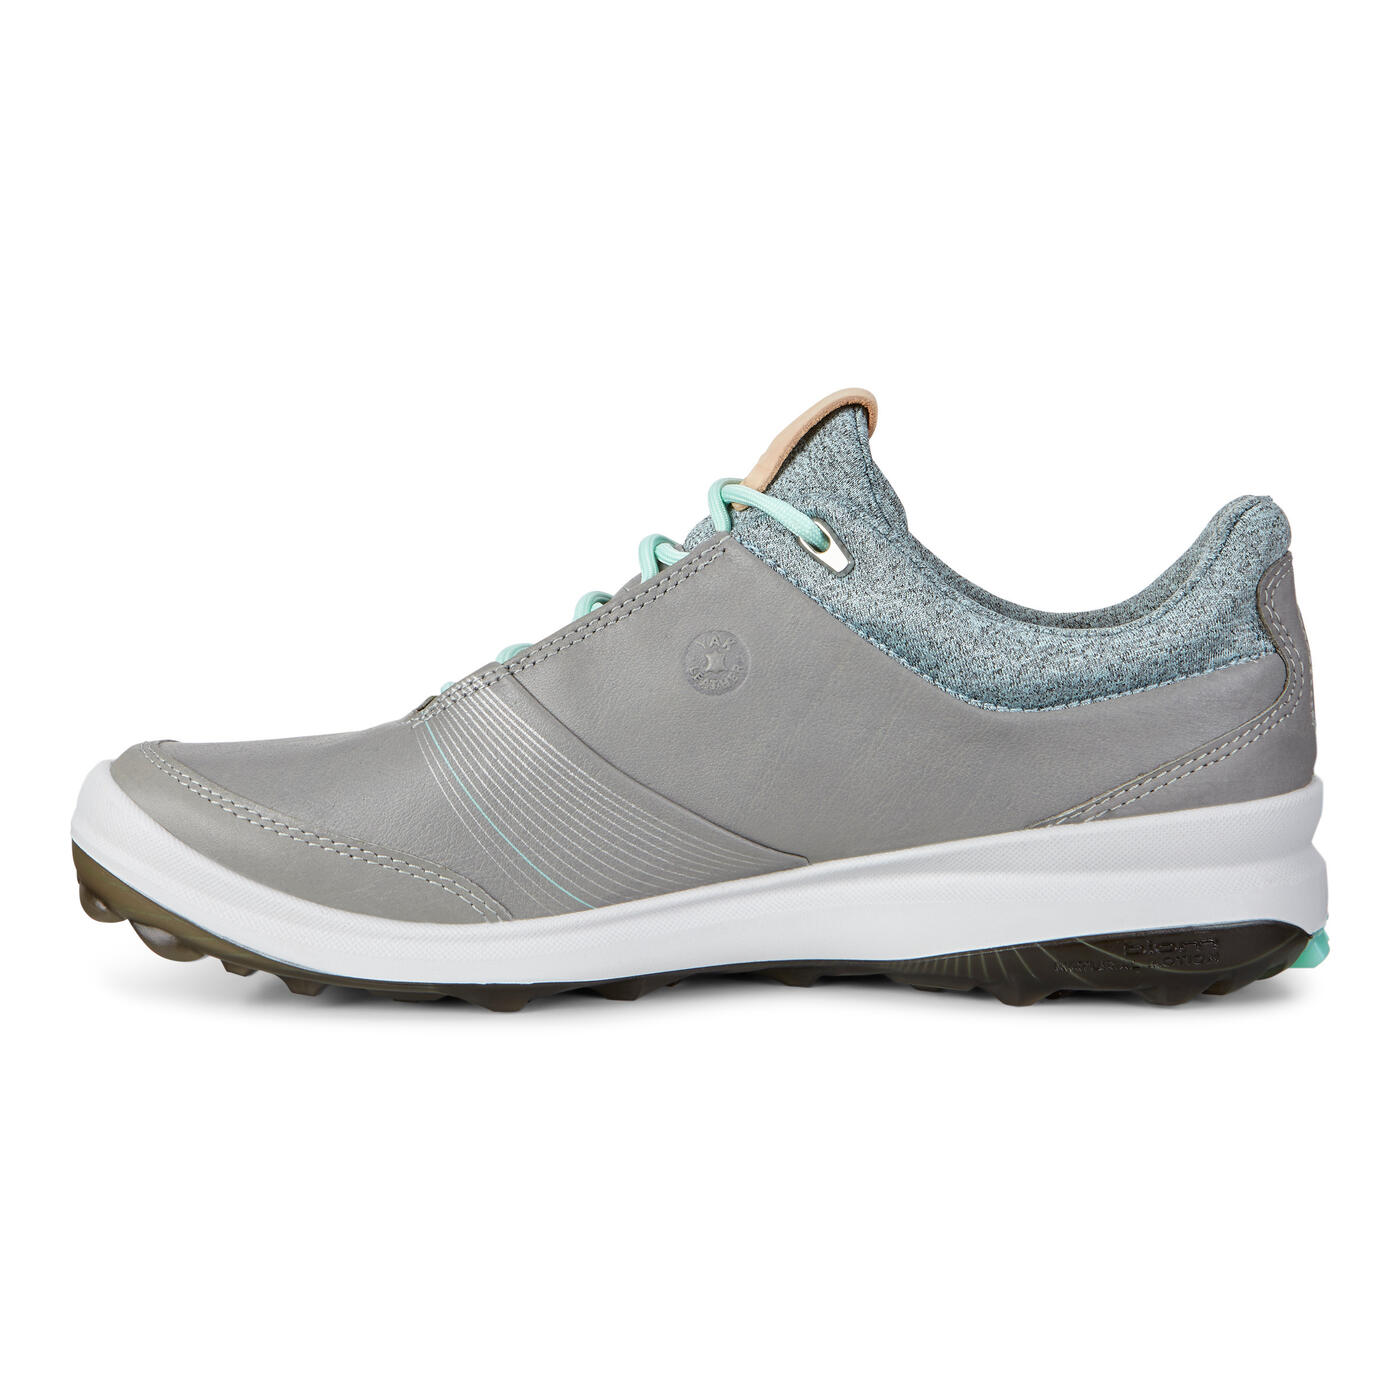 Ecco Golf Shoes Women - Management And Leadership